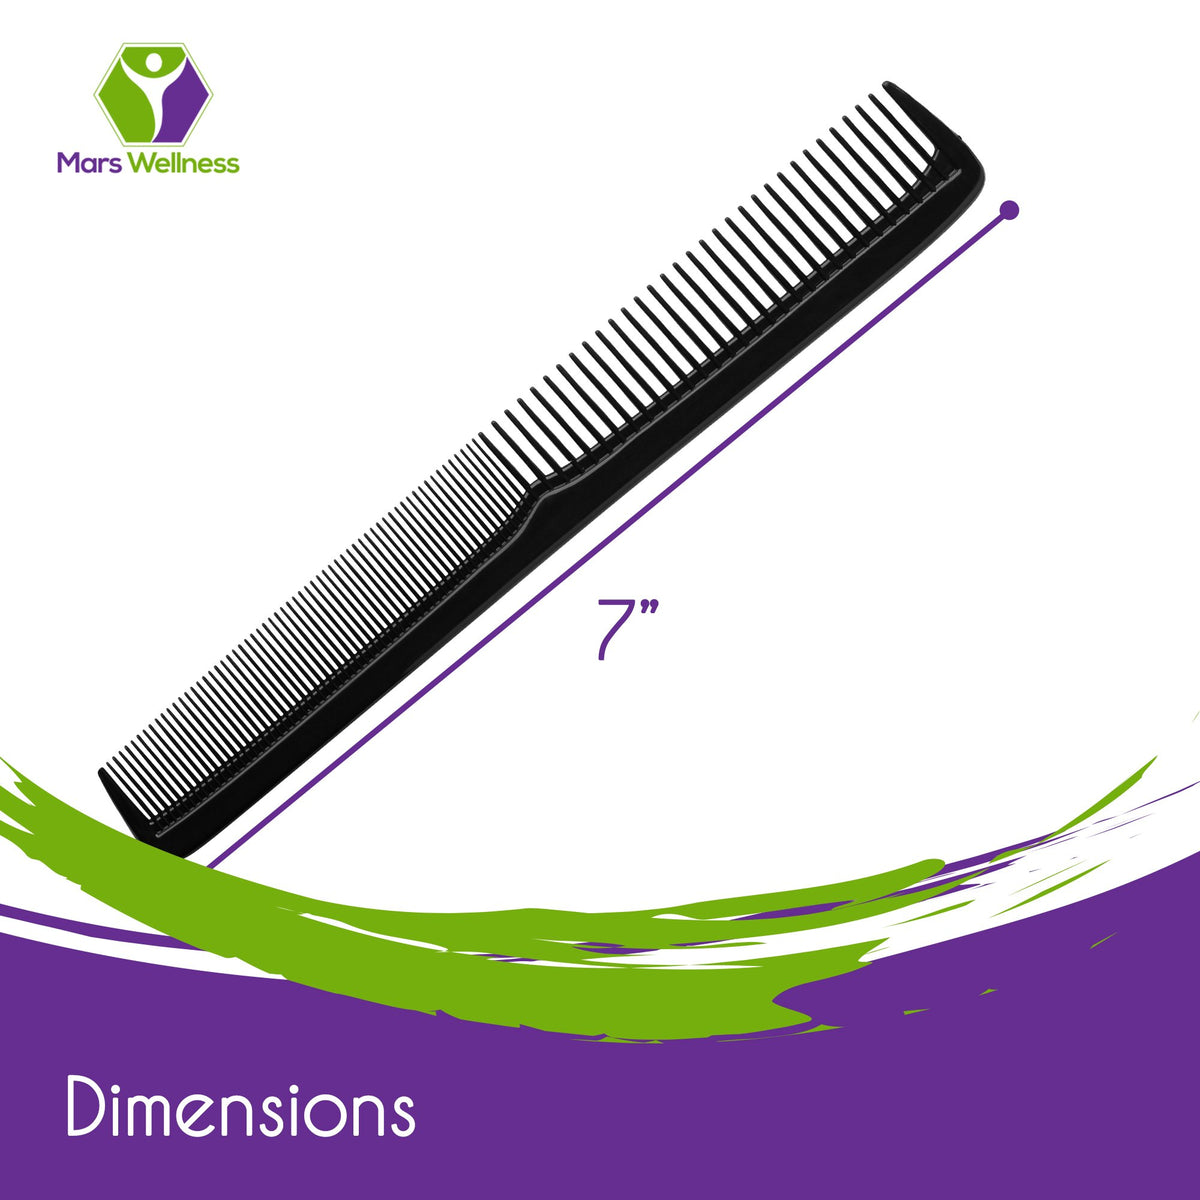 Mars Wellness 7” Hair Styling Comb (Bulk Pack of 24) - Plastic Comb for Men & Women - Black Comb Set - Heat Resistant Comb for All Hair Types - Hair Comb for Salon, Barbershops, Home - Made in USA